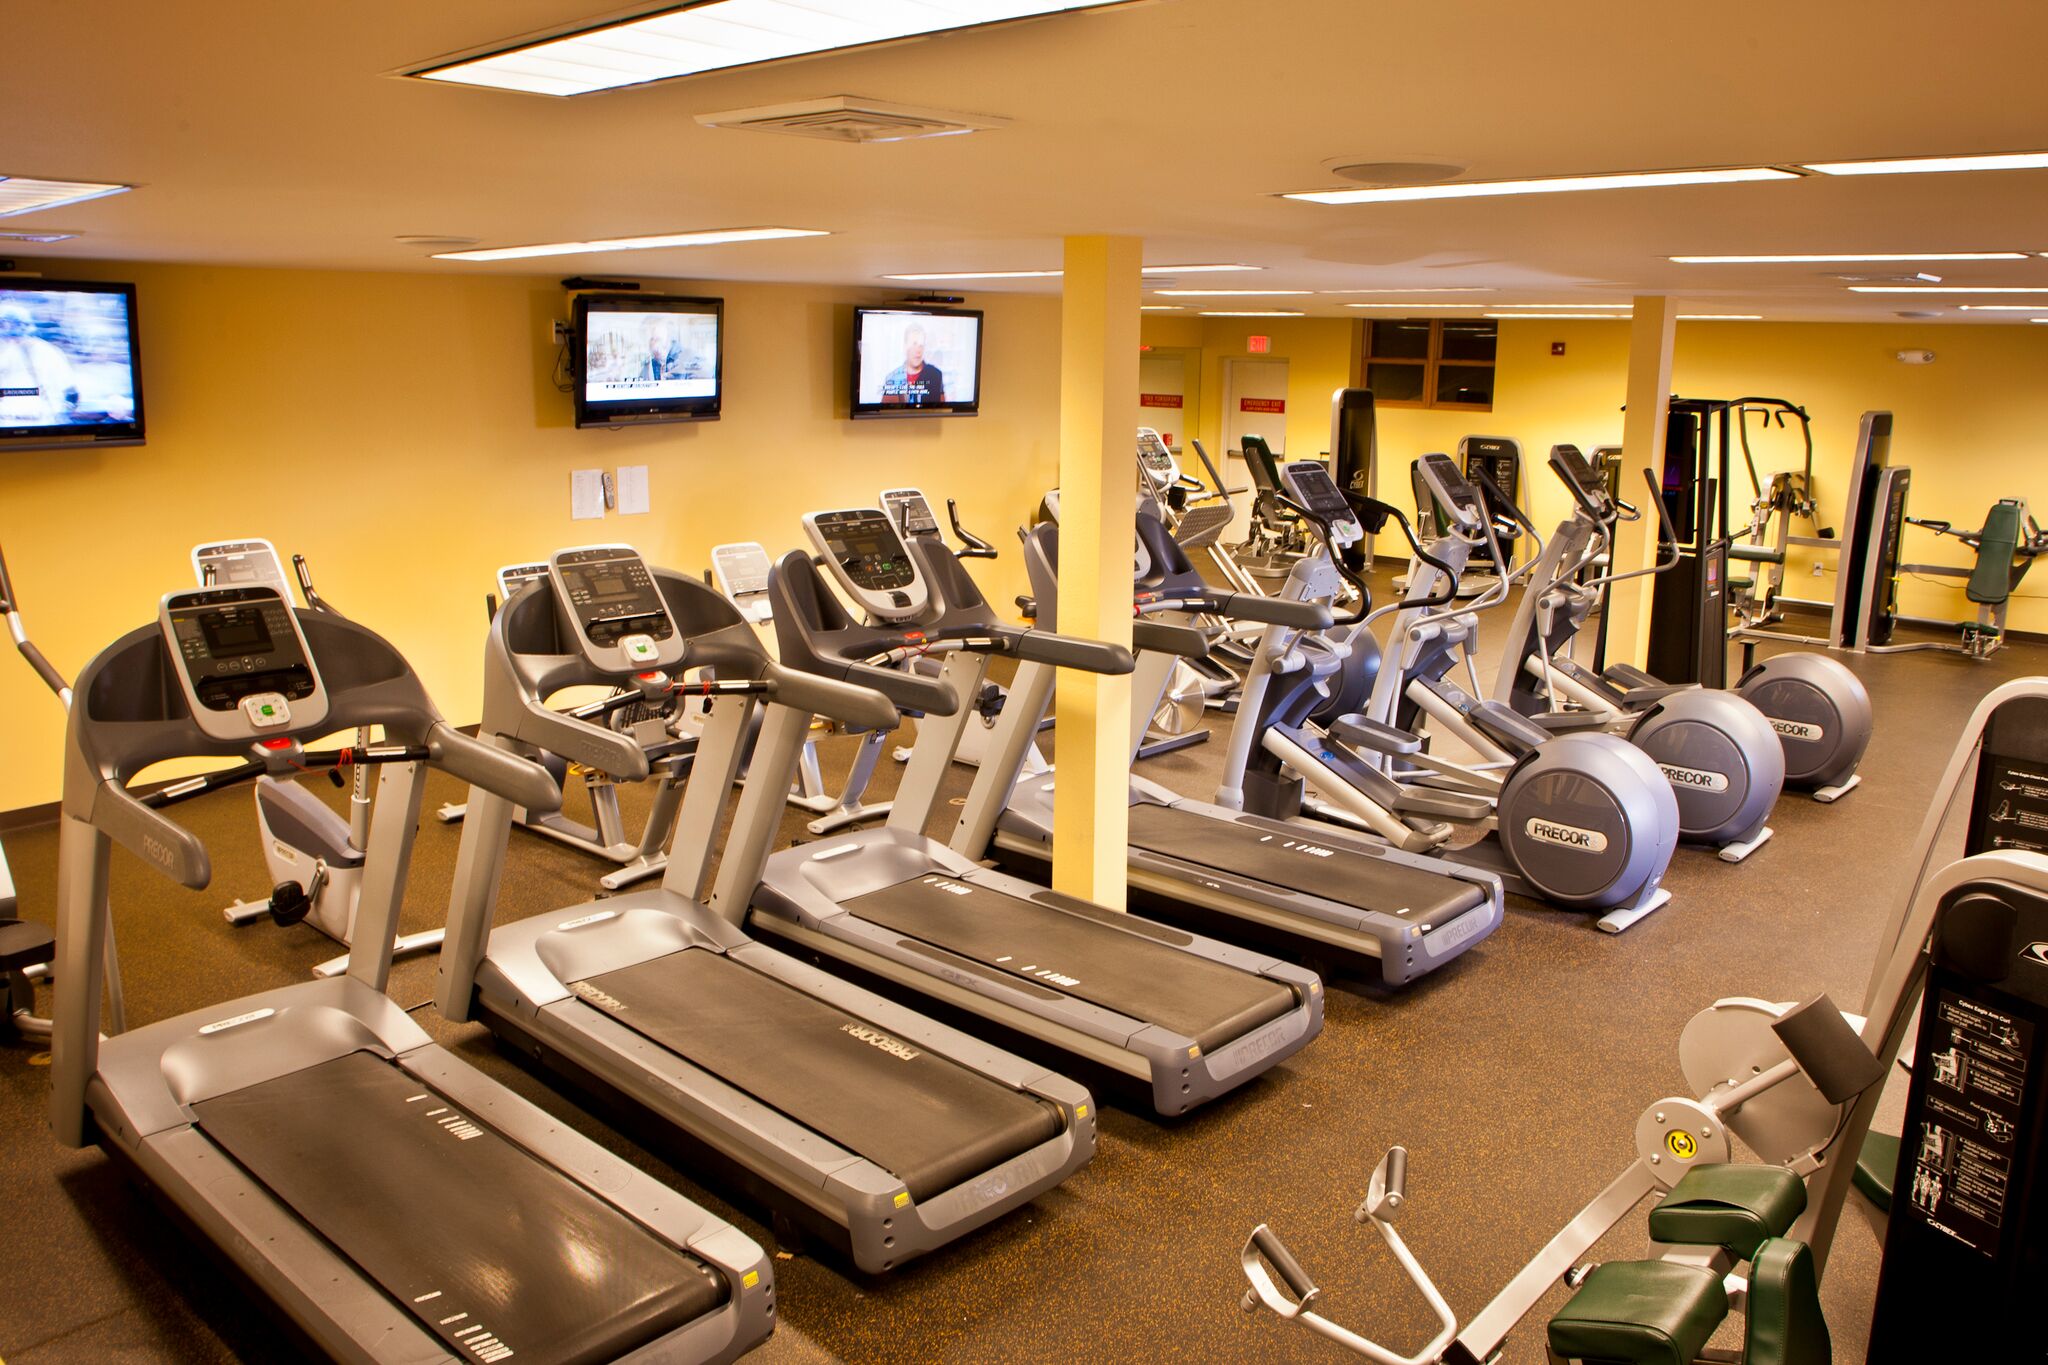 Workout equipment in fitness center